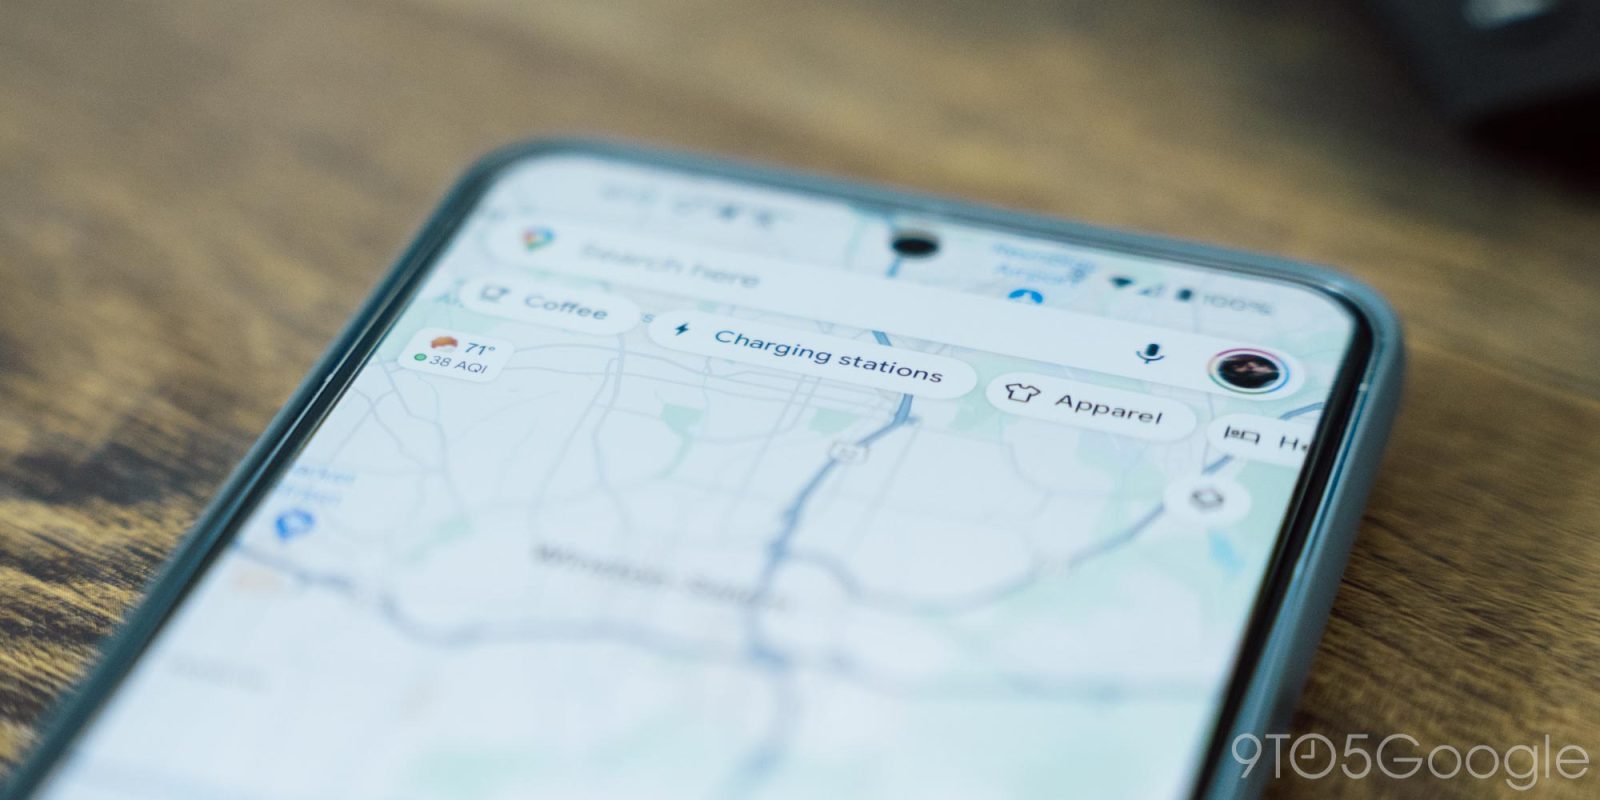 Google Maps makes it easier to find EV charging stations and see specific roads